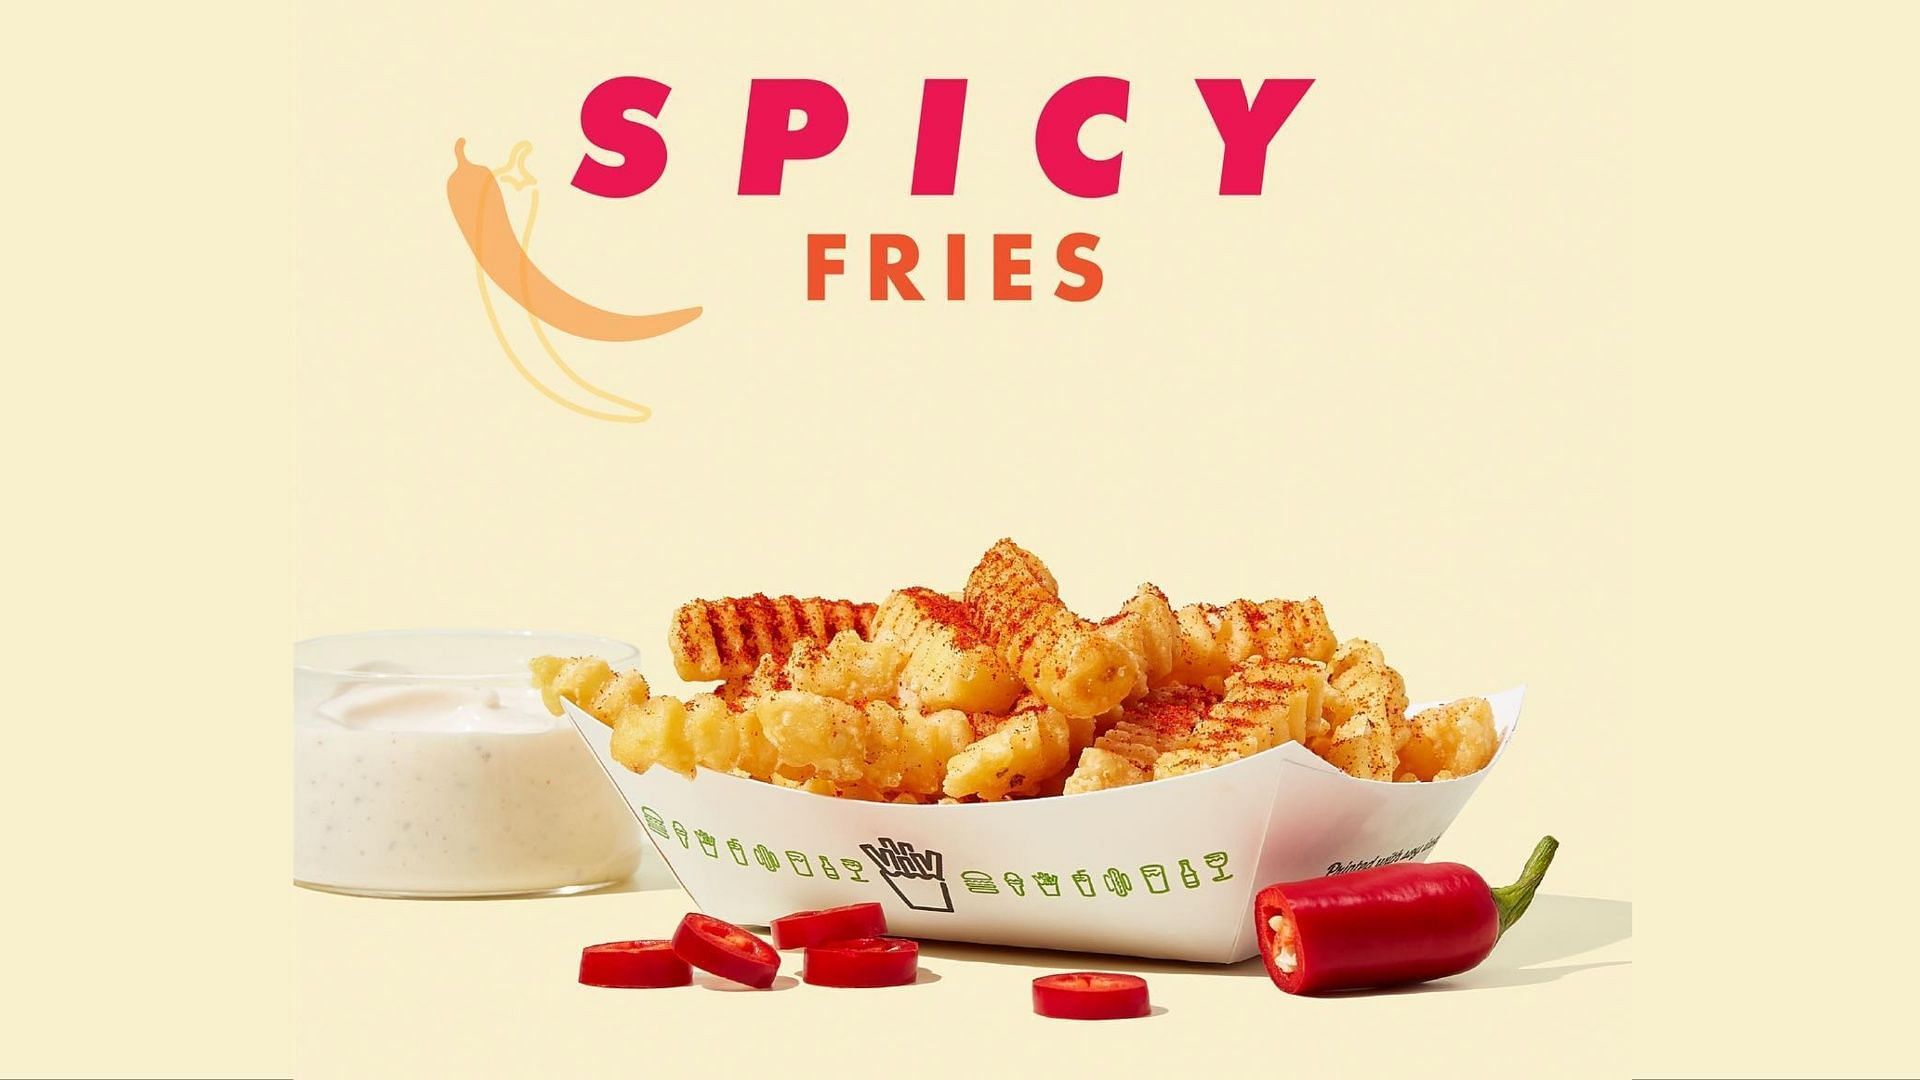 New Spicy Fries with Ranch Sauce (Image via Shake Shack)